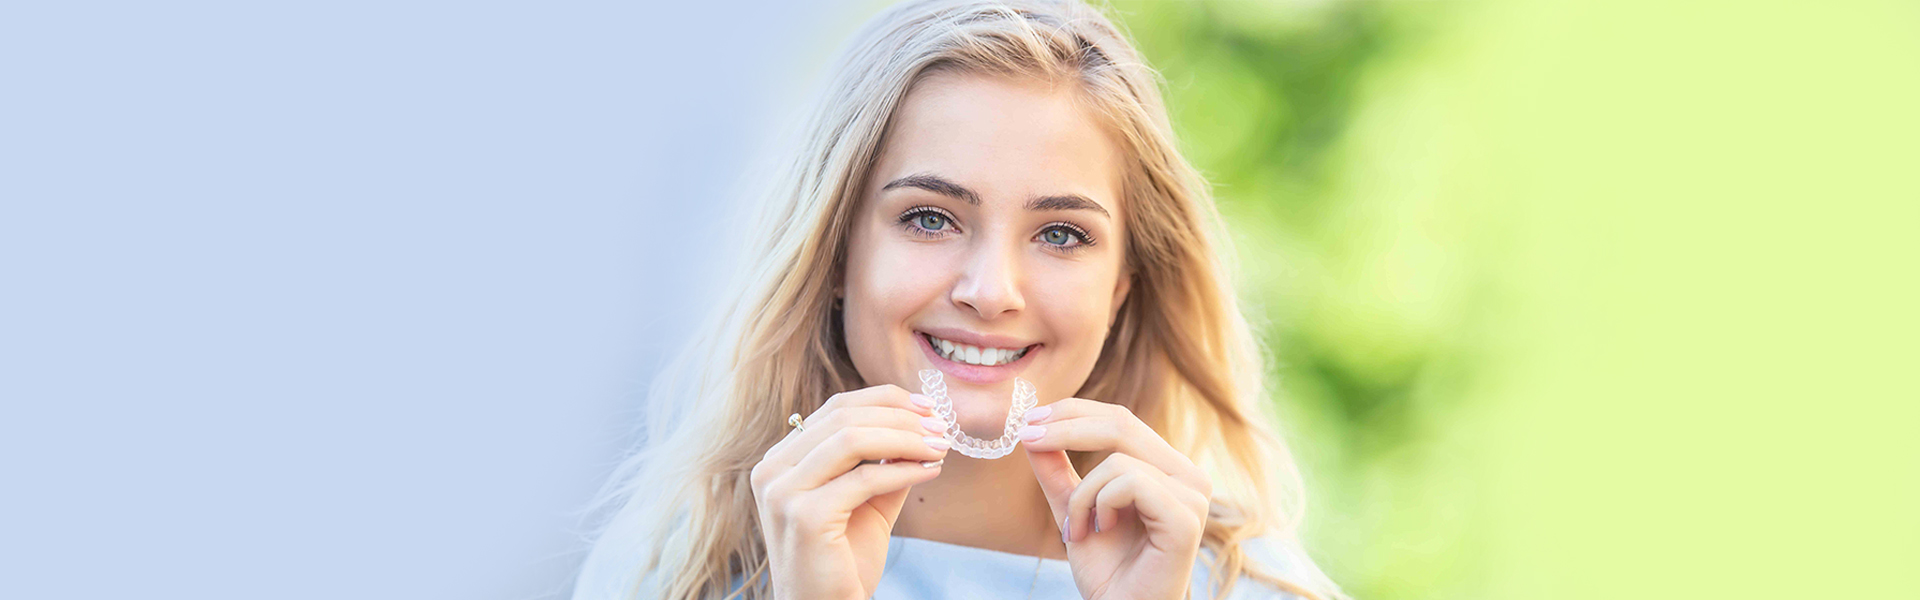 Invisalign: The Perfect New Year's Resolution For A Better Smile